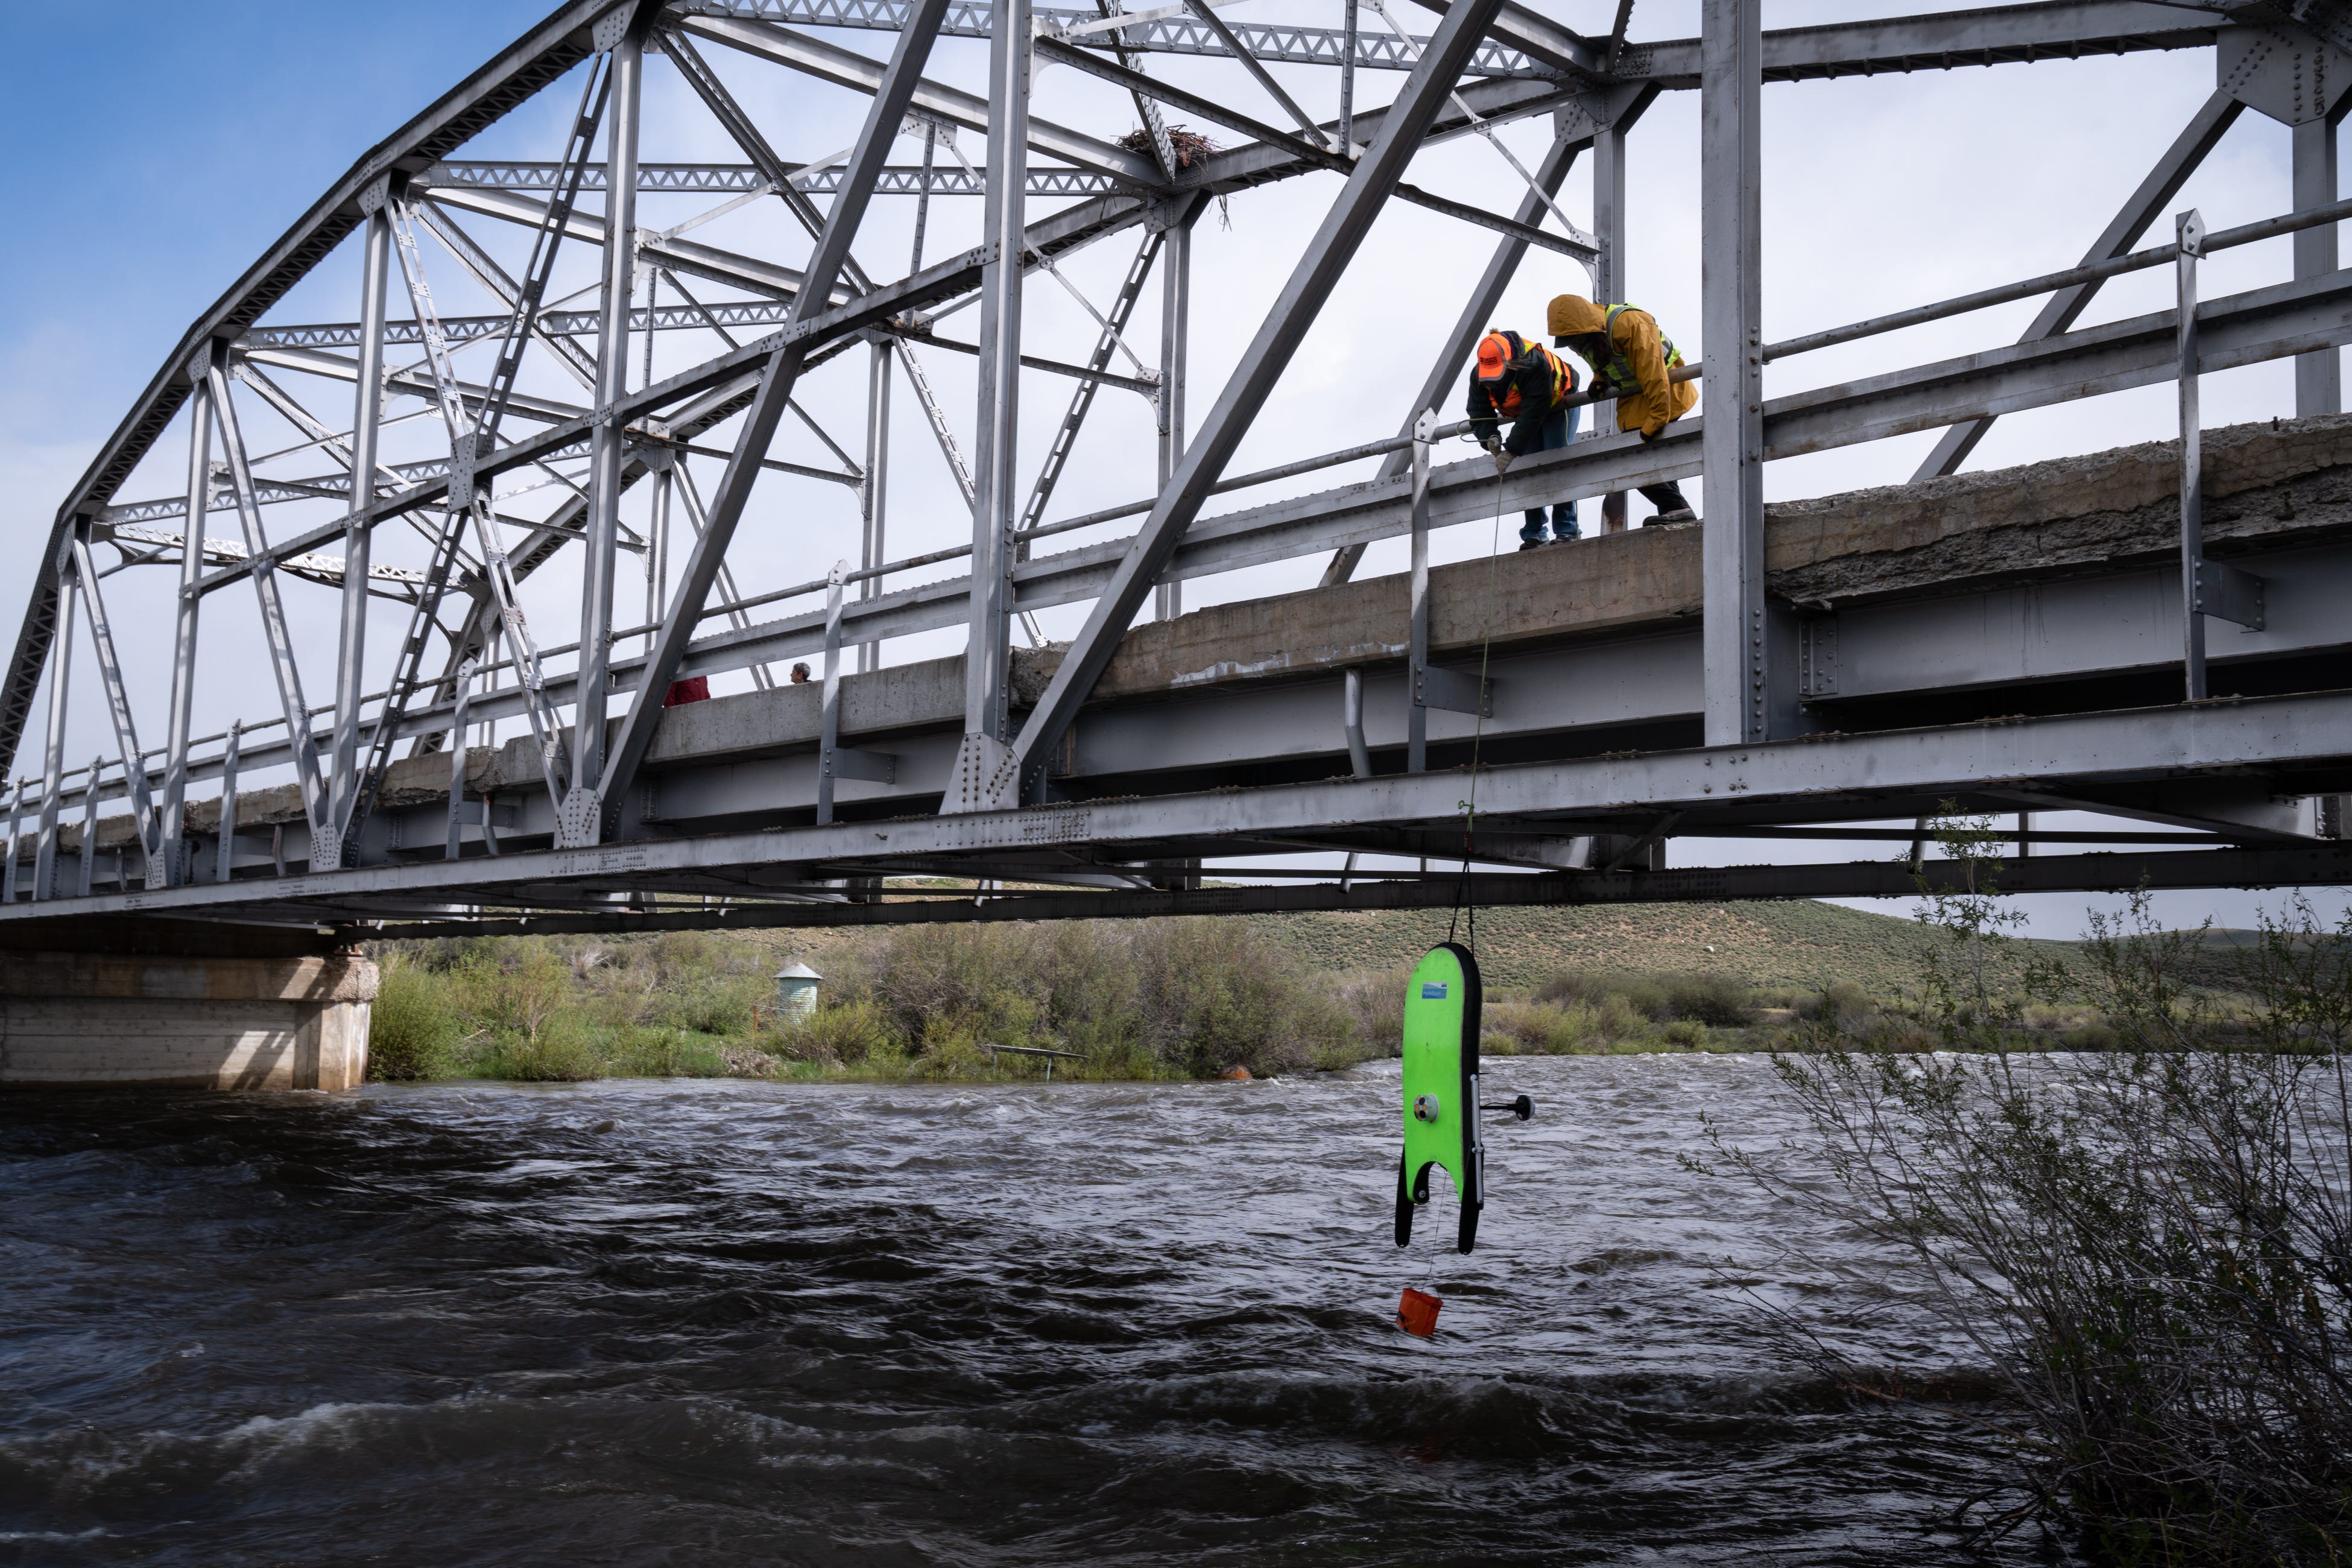 Megan Moss (left) and Shea Musselman, both with the United States Geological Survey, pull a hydroboard from the Green River on June 14, 2022. The hydroboard measures streamflow (discharge) and creates a streambed profile. Runoff at this point peaked relatively high compared to historic readings, but the season’s flow would end up well below average.